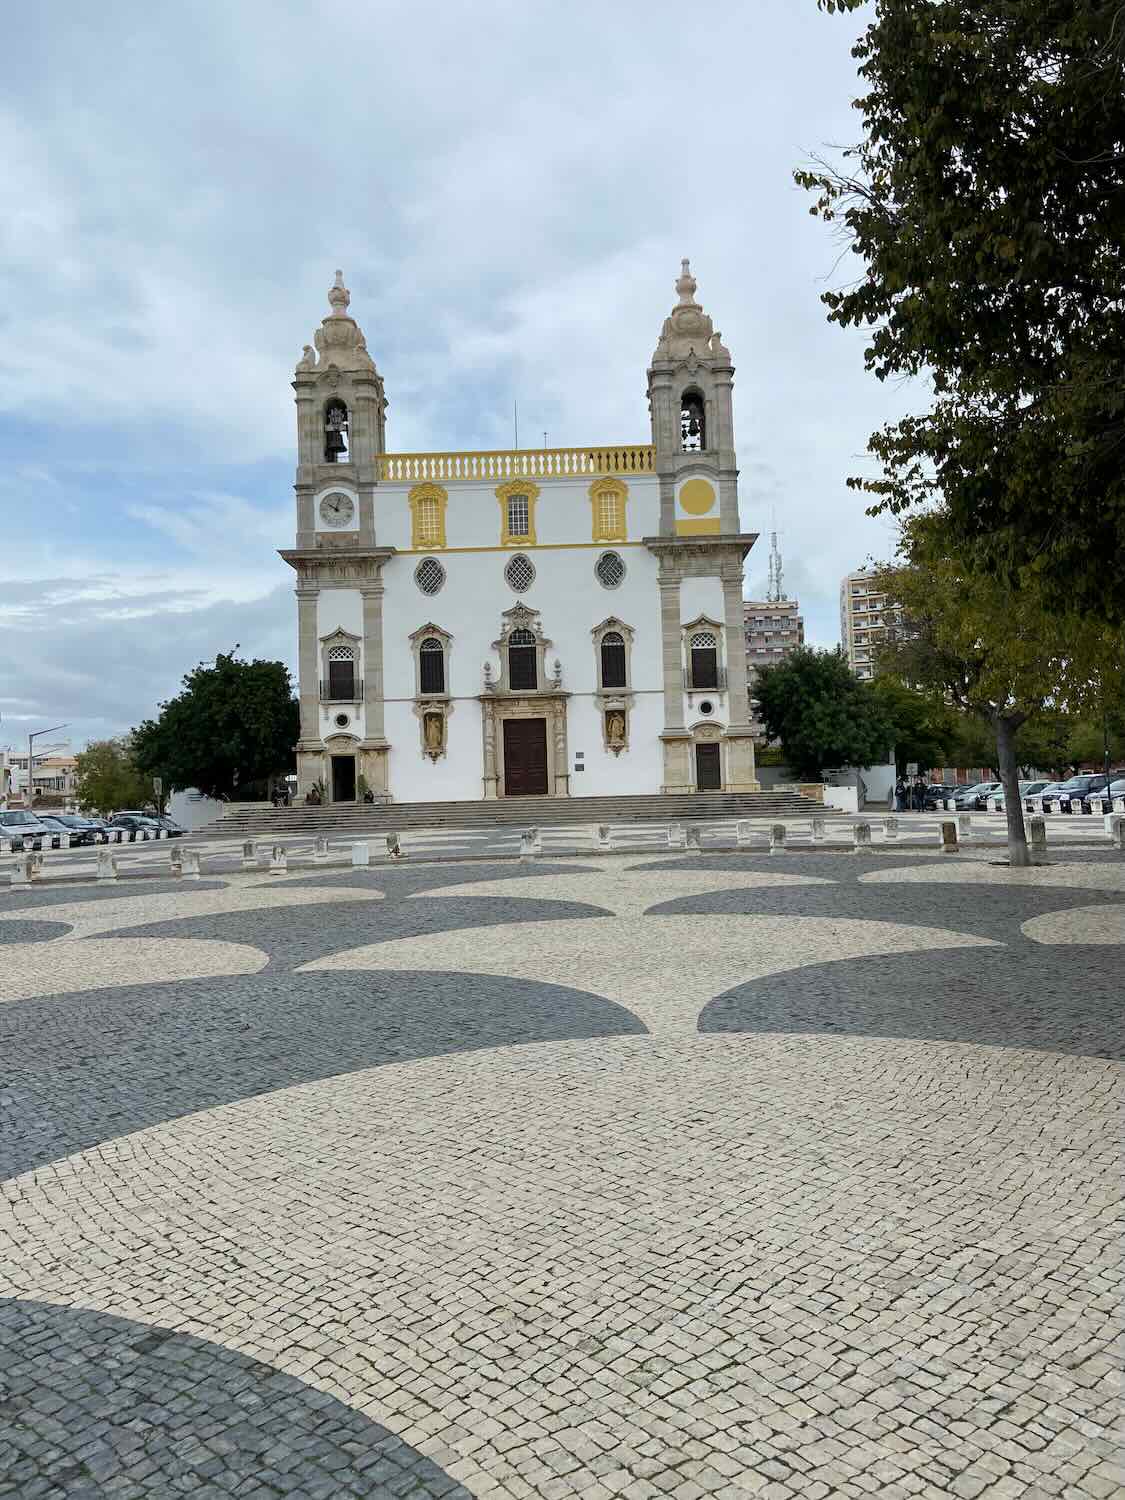 Historic Faro church with striking white facade and twin bell towers, set against a patterned cobblestone square on a cloudy day in Faro, as seen during a Lisbon day trip."

